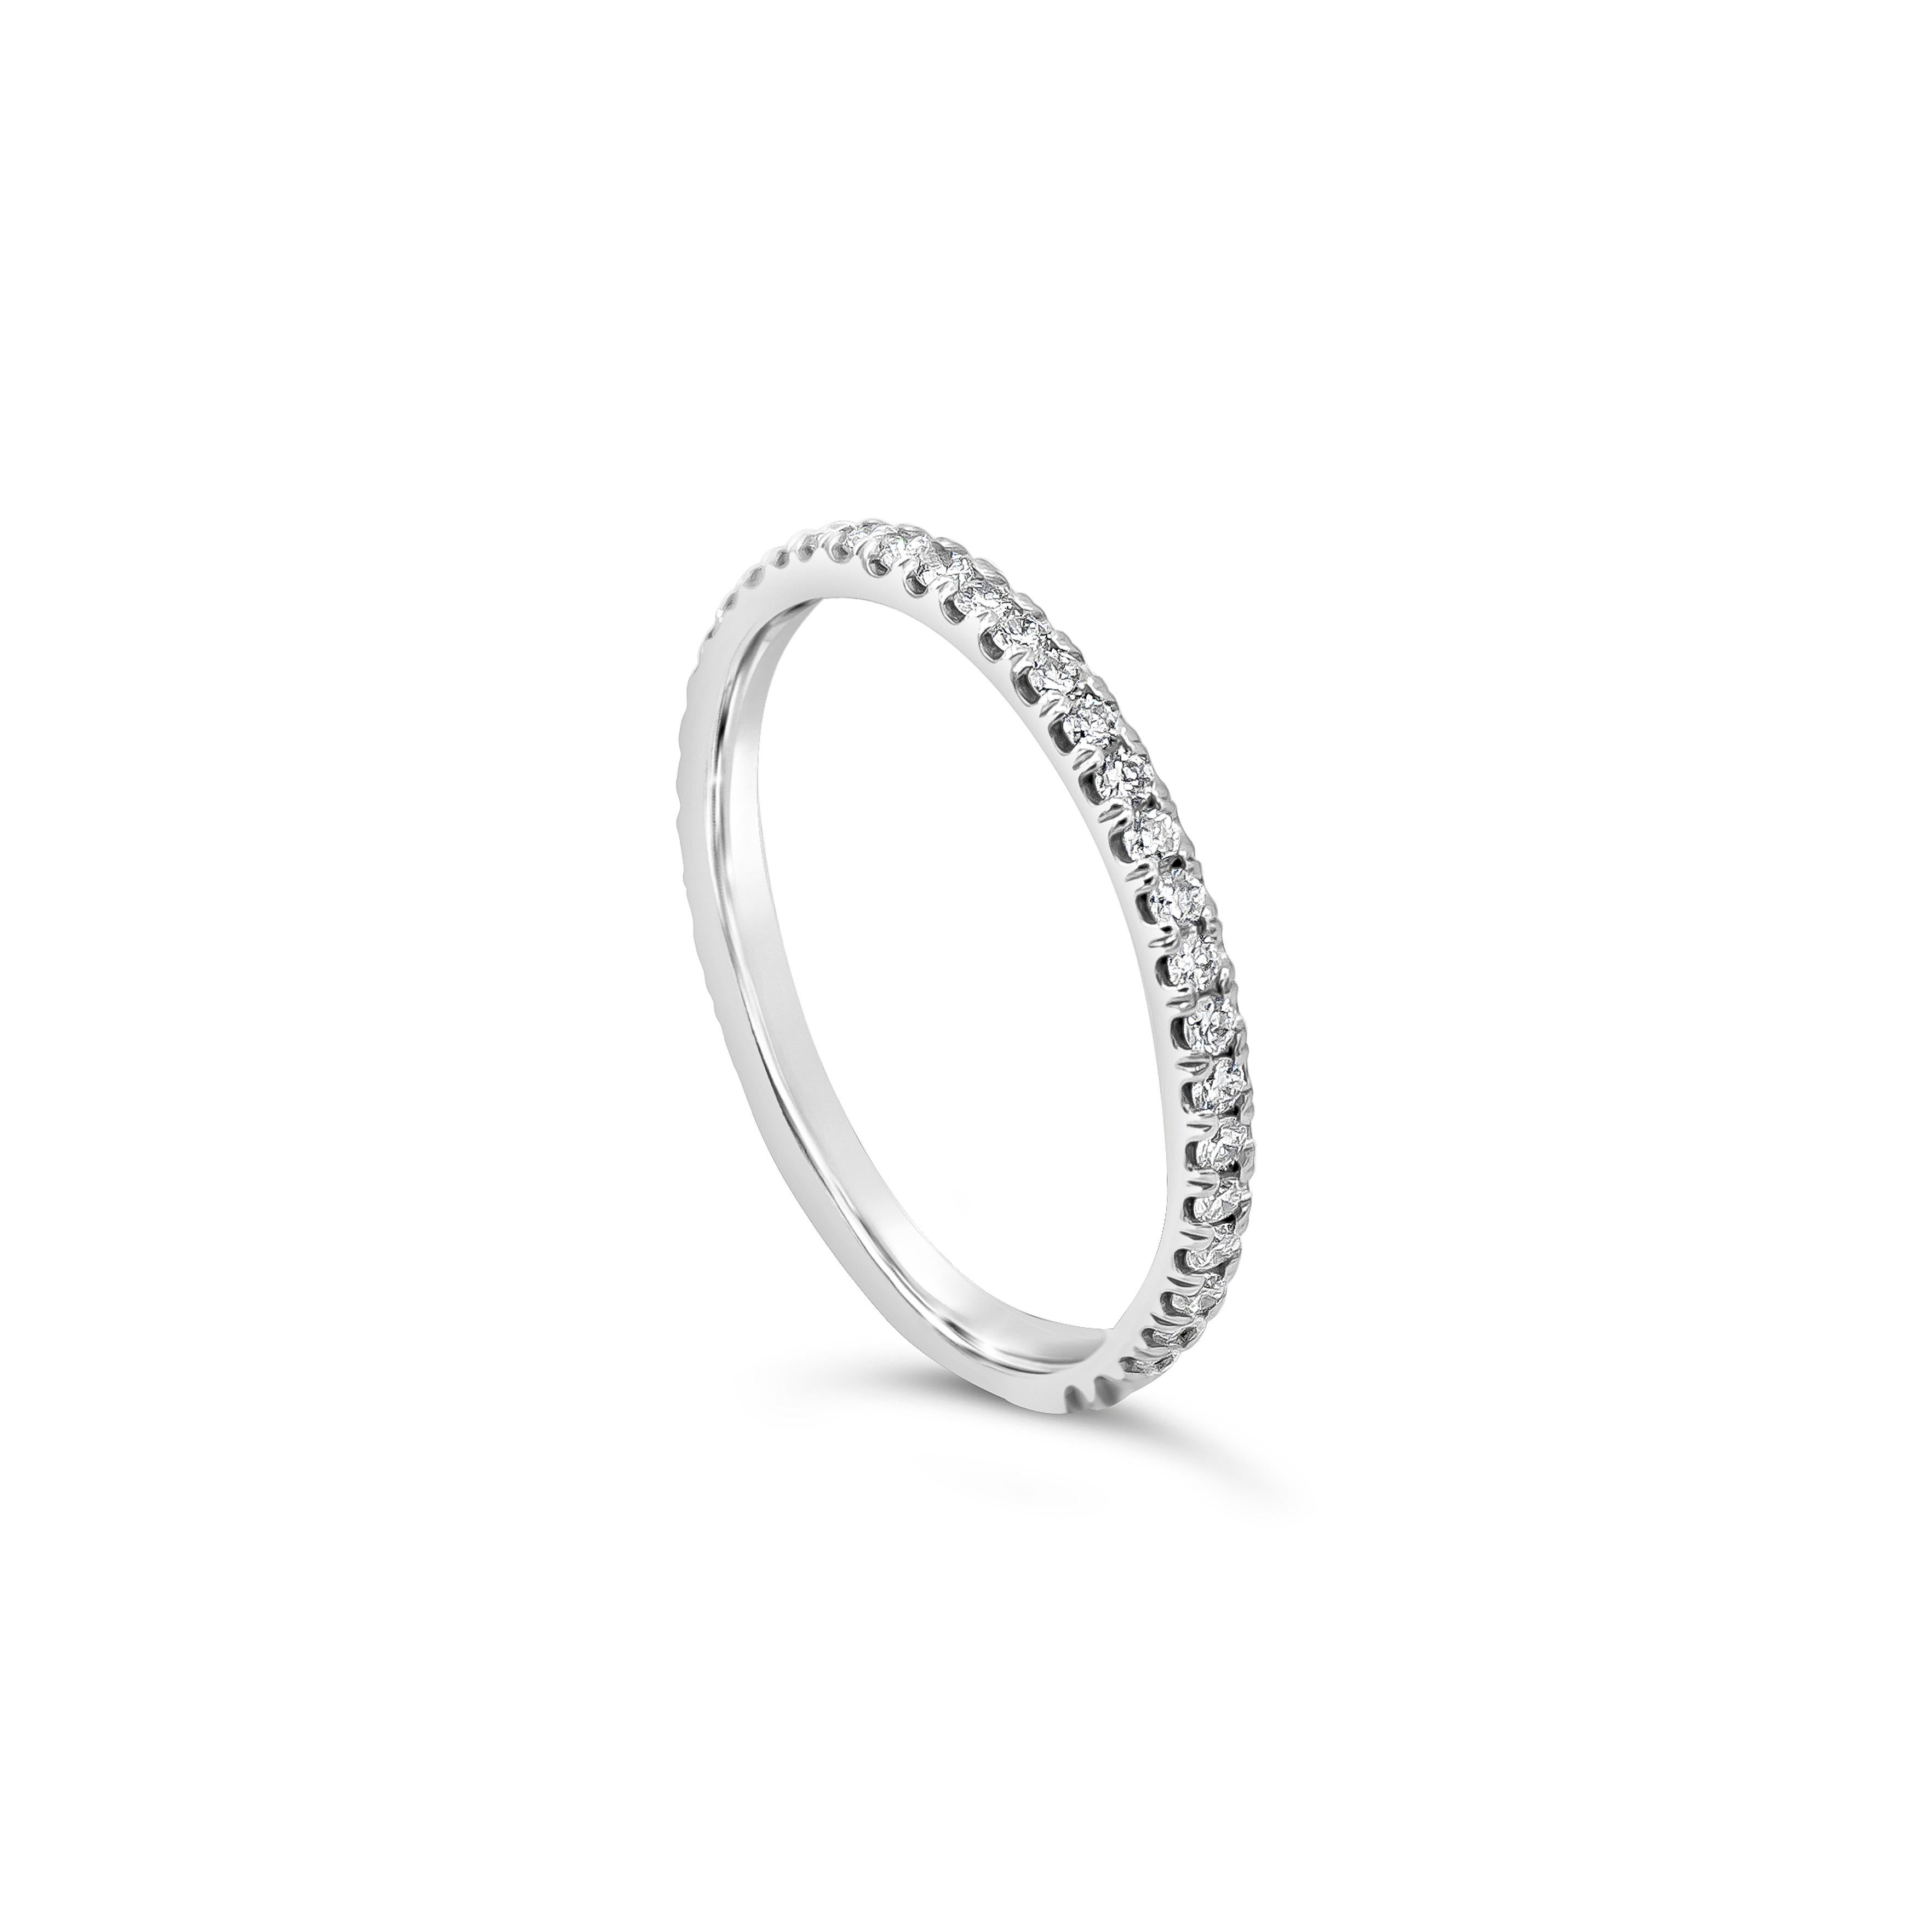 A classic eternity wedding band style showcasing a line of round brilliant diamonds weighing 0.38 carats. Set in a scalloped pave set and Made in 18K White Gold. Size 6 US resizable upon request.

Roman Malakov is a custom house, specializing in